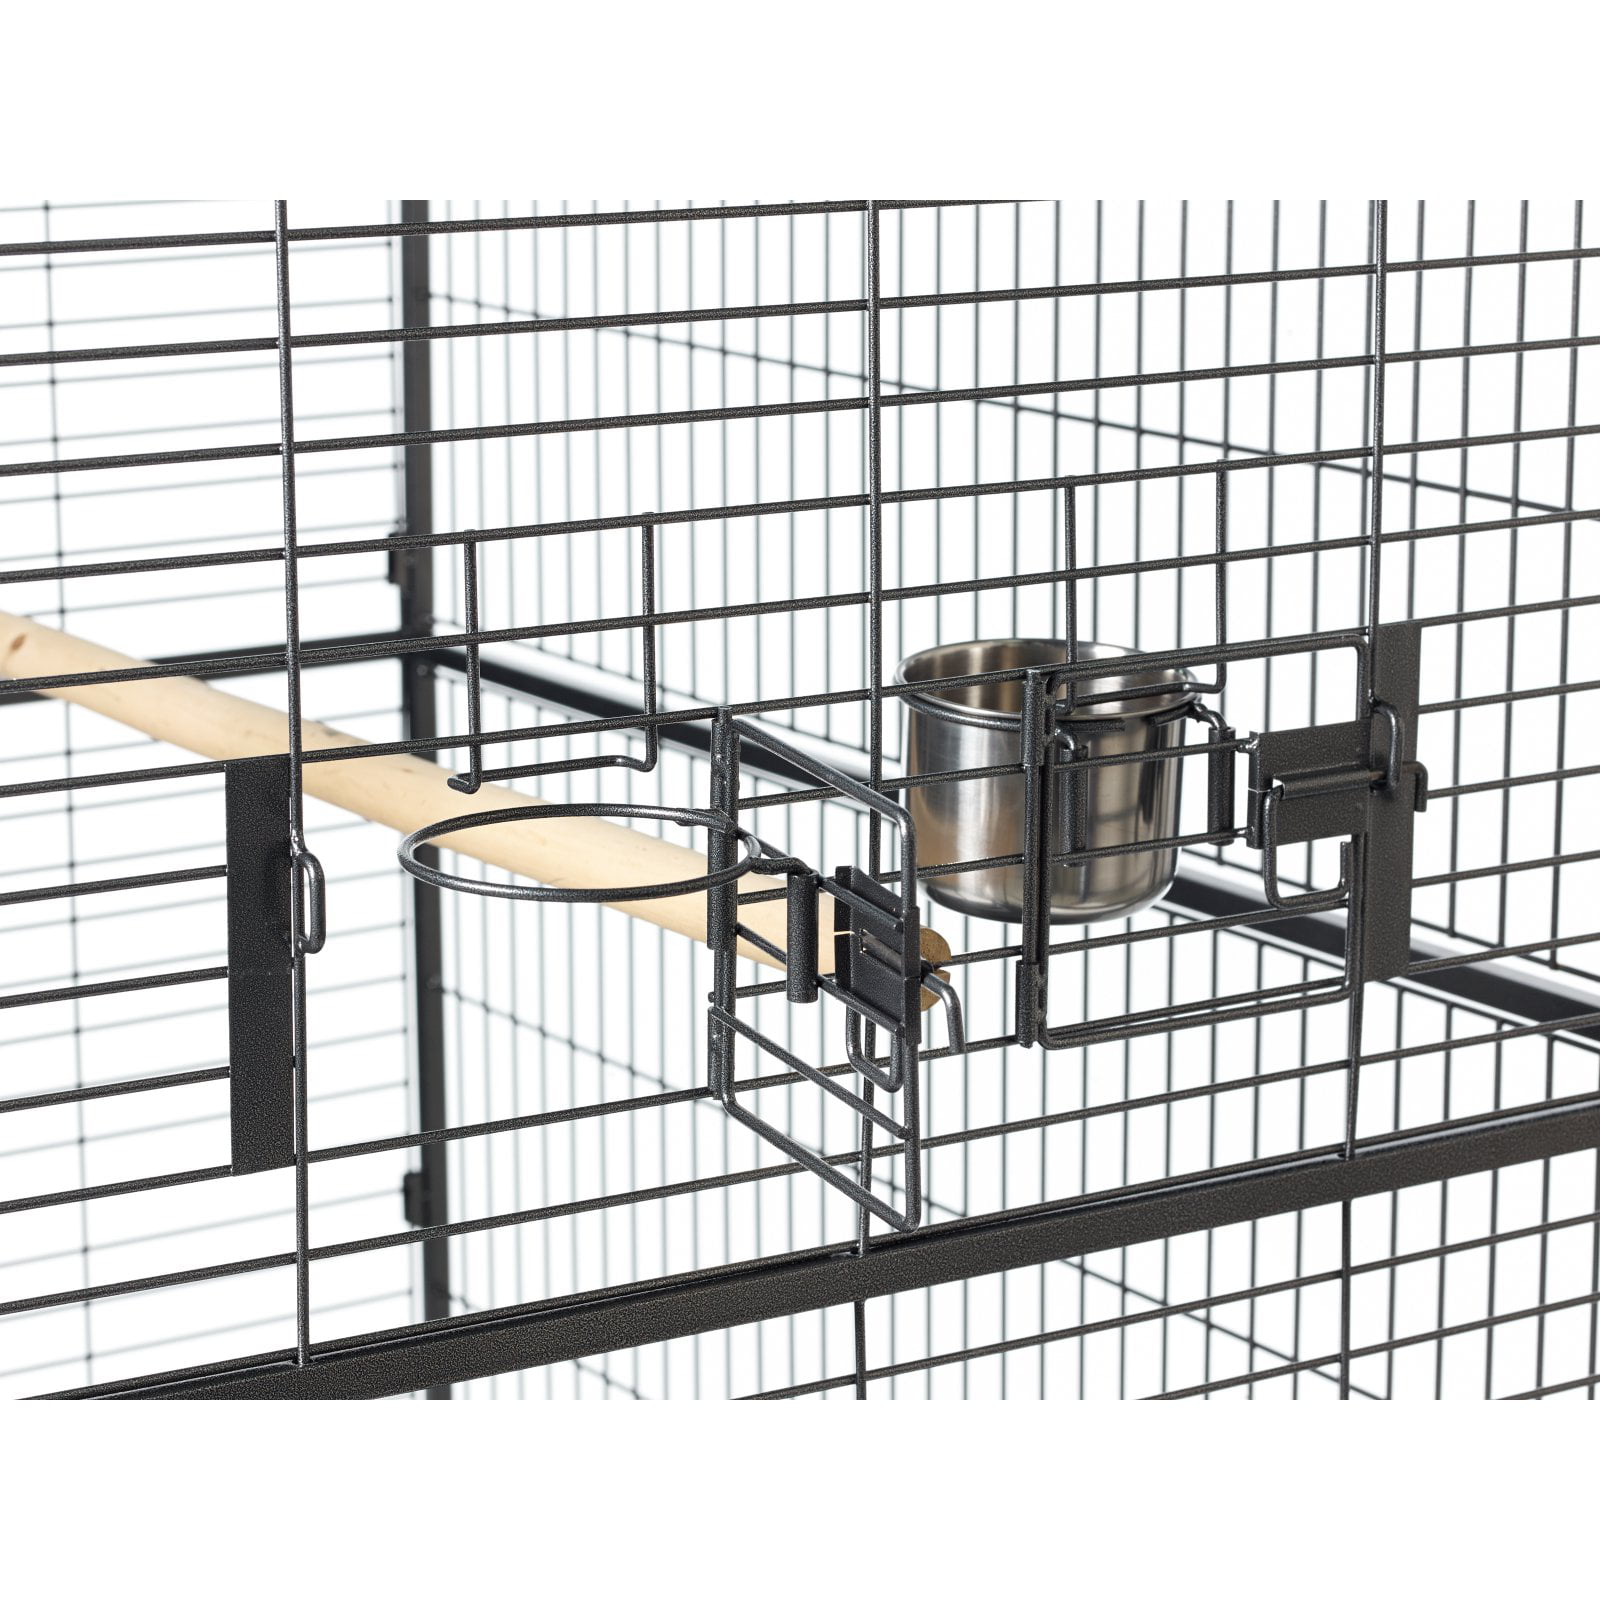  Prevue Pet Products Empire Bird Cage, X-Large, Black